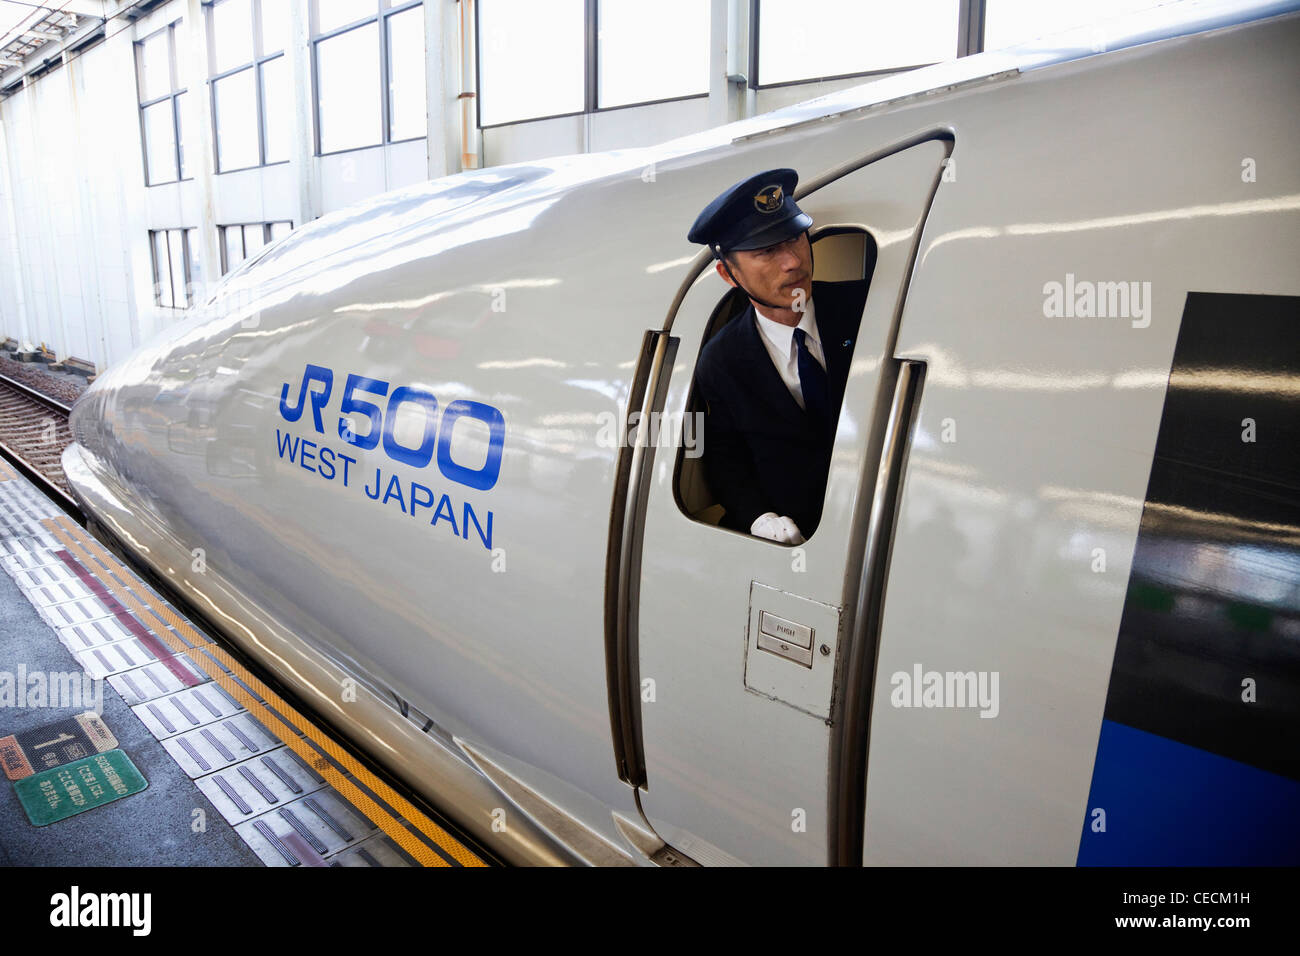 train-conductor-leaning-out-of-window-of-bullet-train-shinkansen-japan-CECM1H.jpg